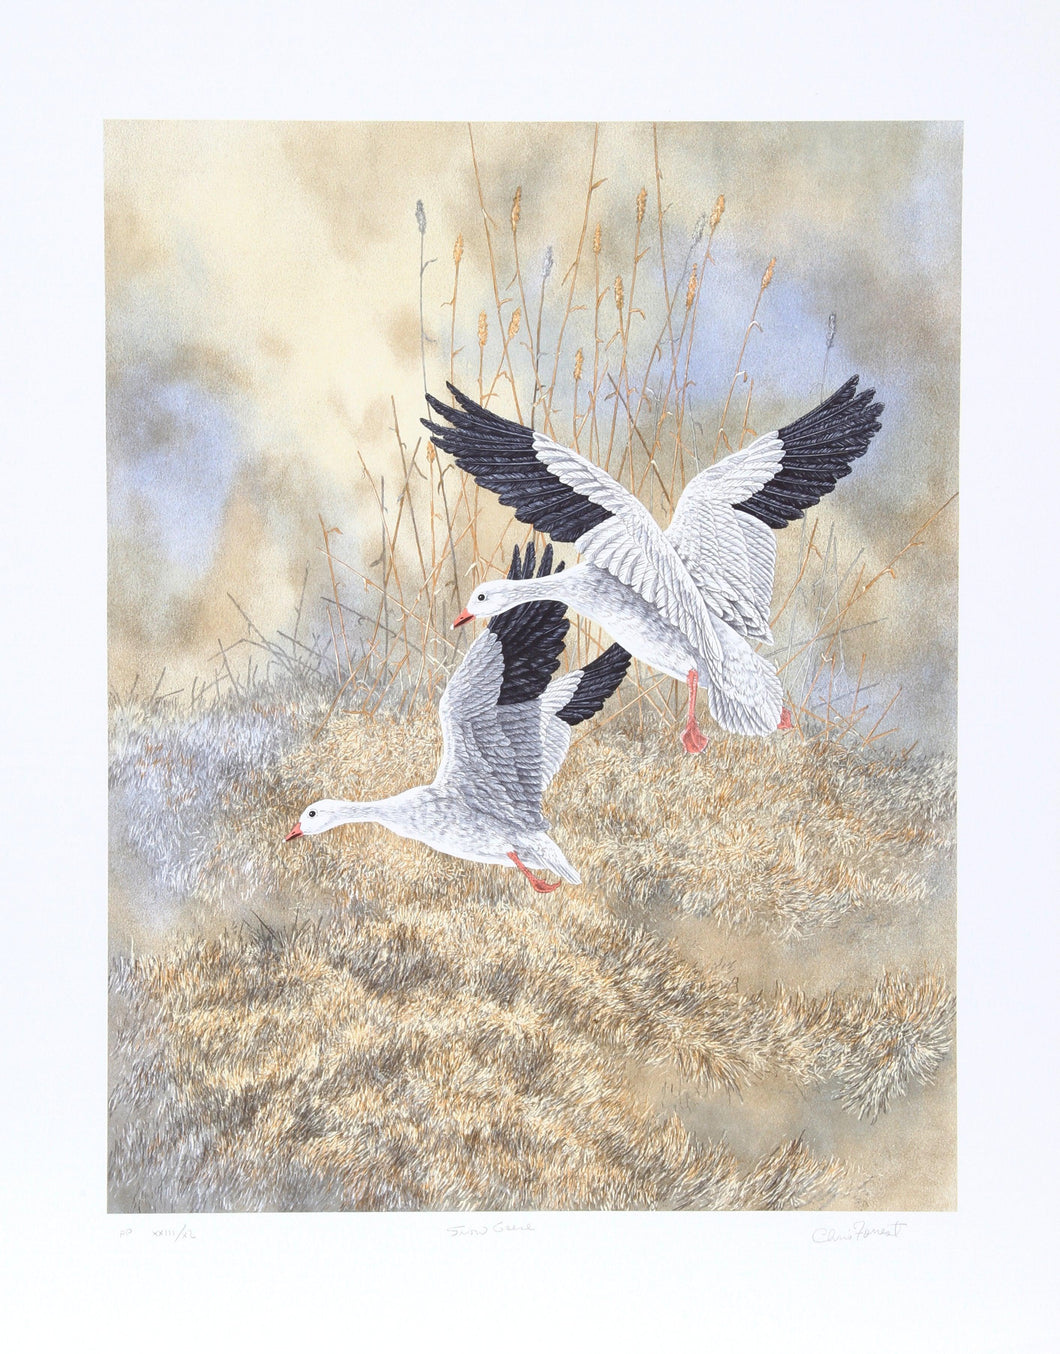 Snow Geese Landing Lithograph | Chris Forrest,{{product.type}}